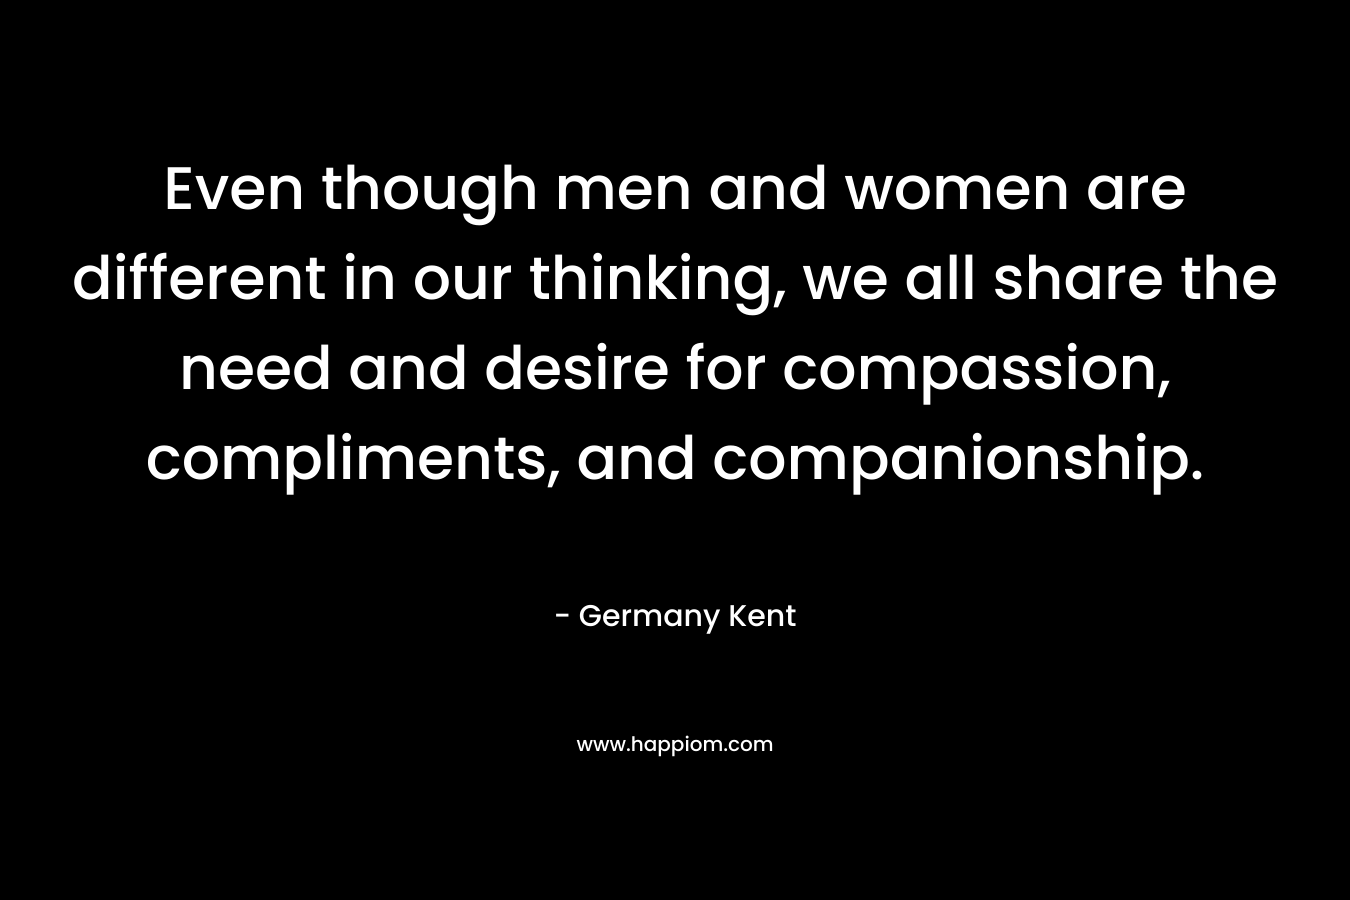 Even though men and women are different in our thinking, we all share the need and desire for compassion, compliments, and companionship. – Germany Kent